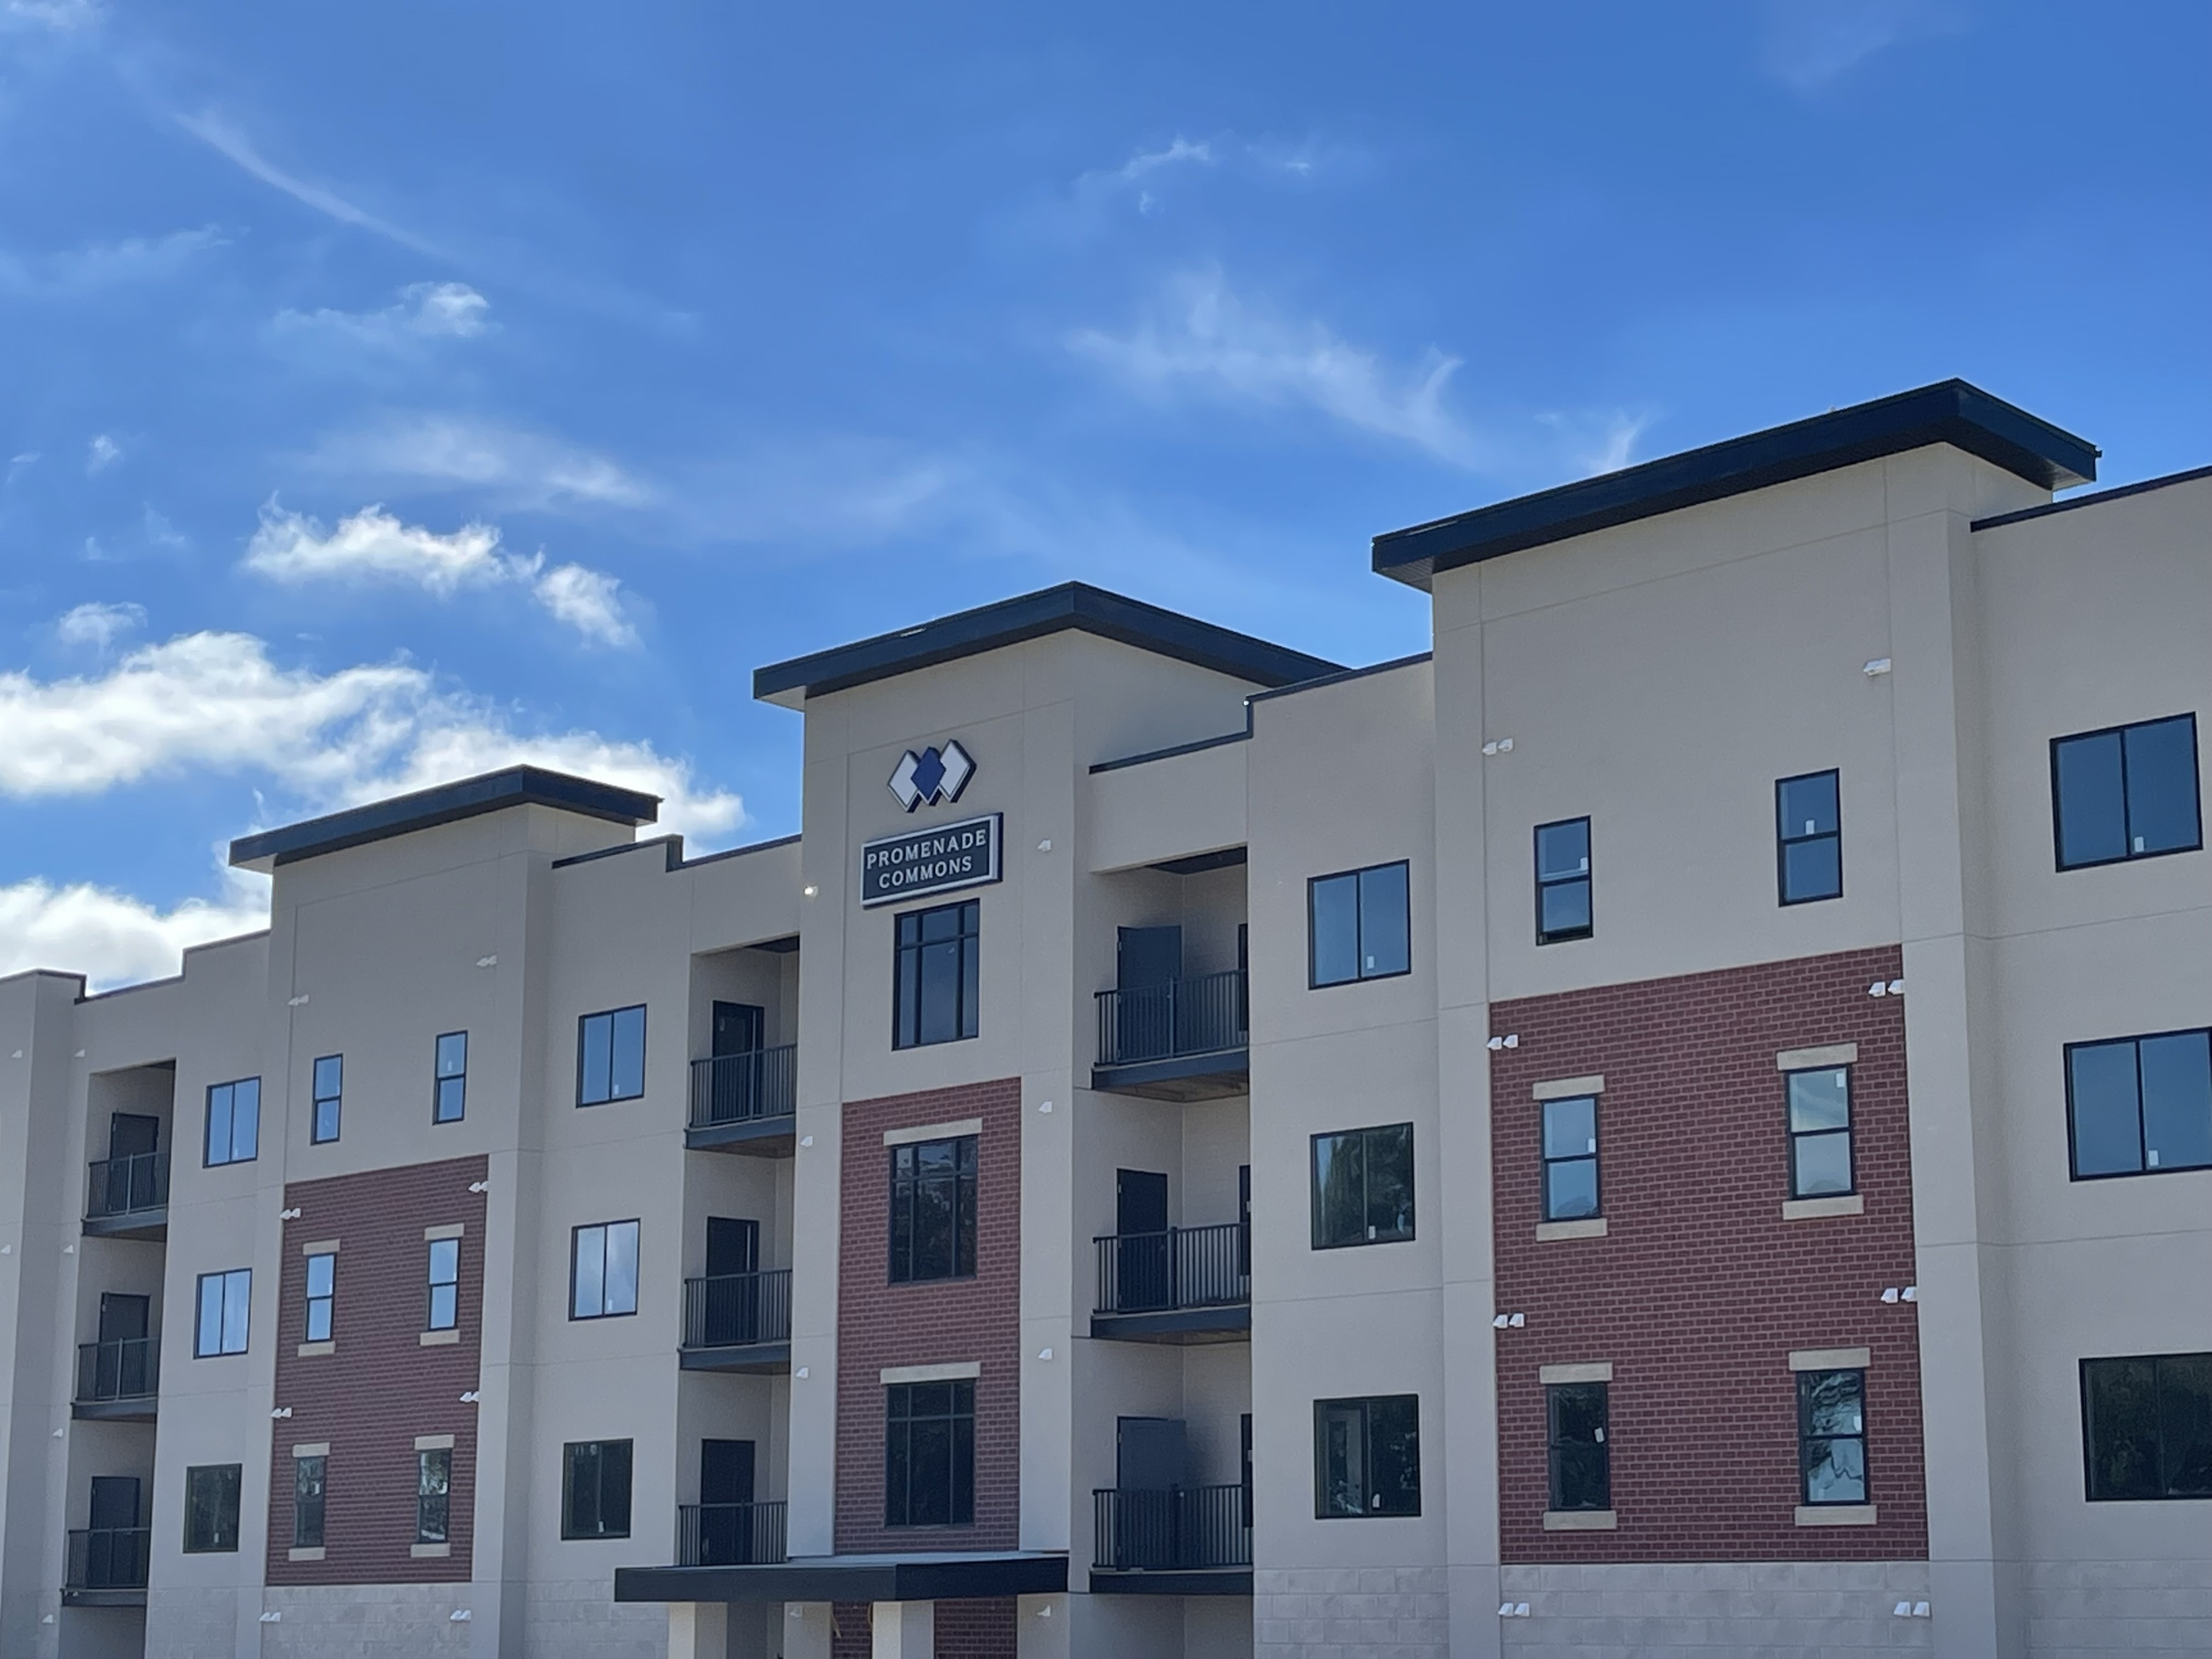 Promenade Commons Brings a New 55+ Lifestyle to Northwest Arkansas-image